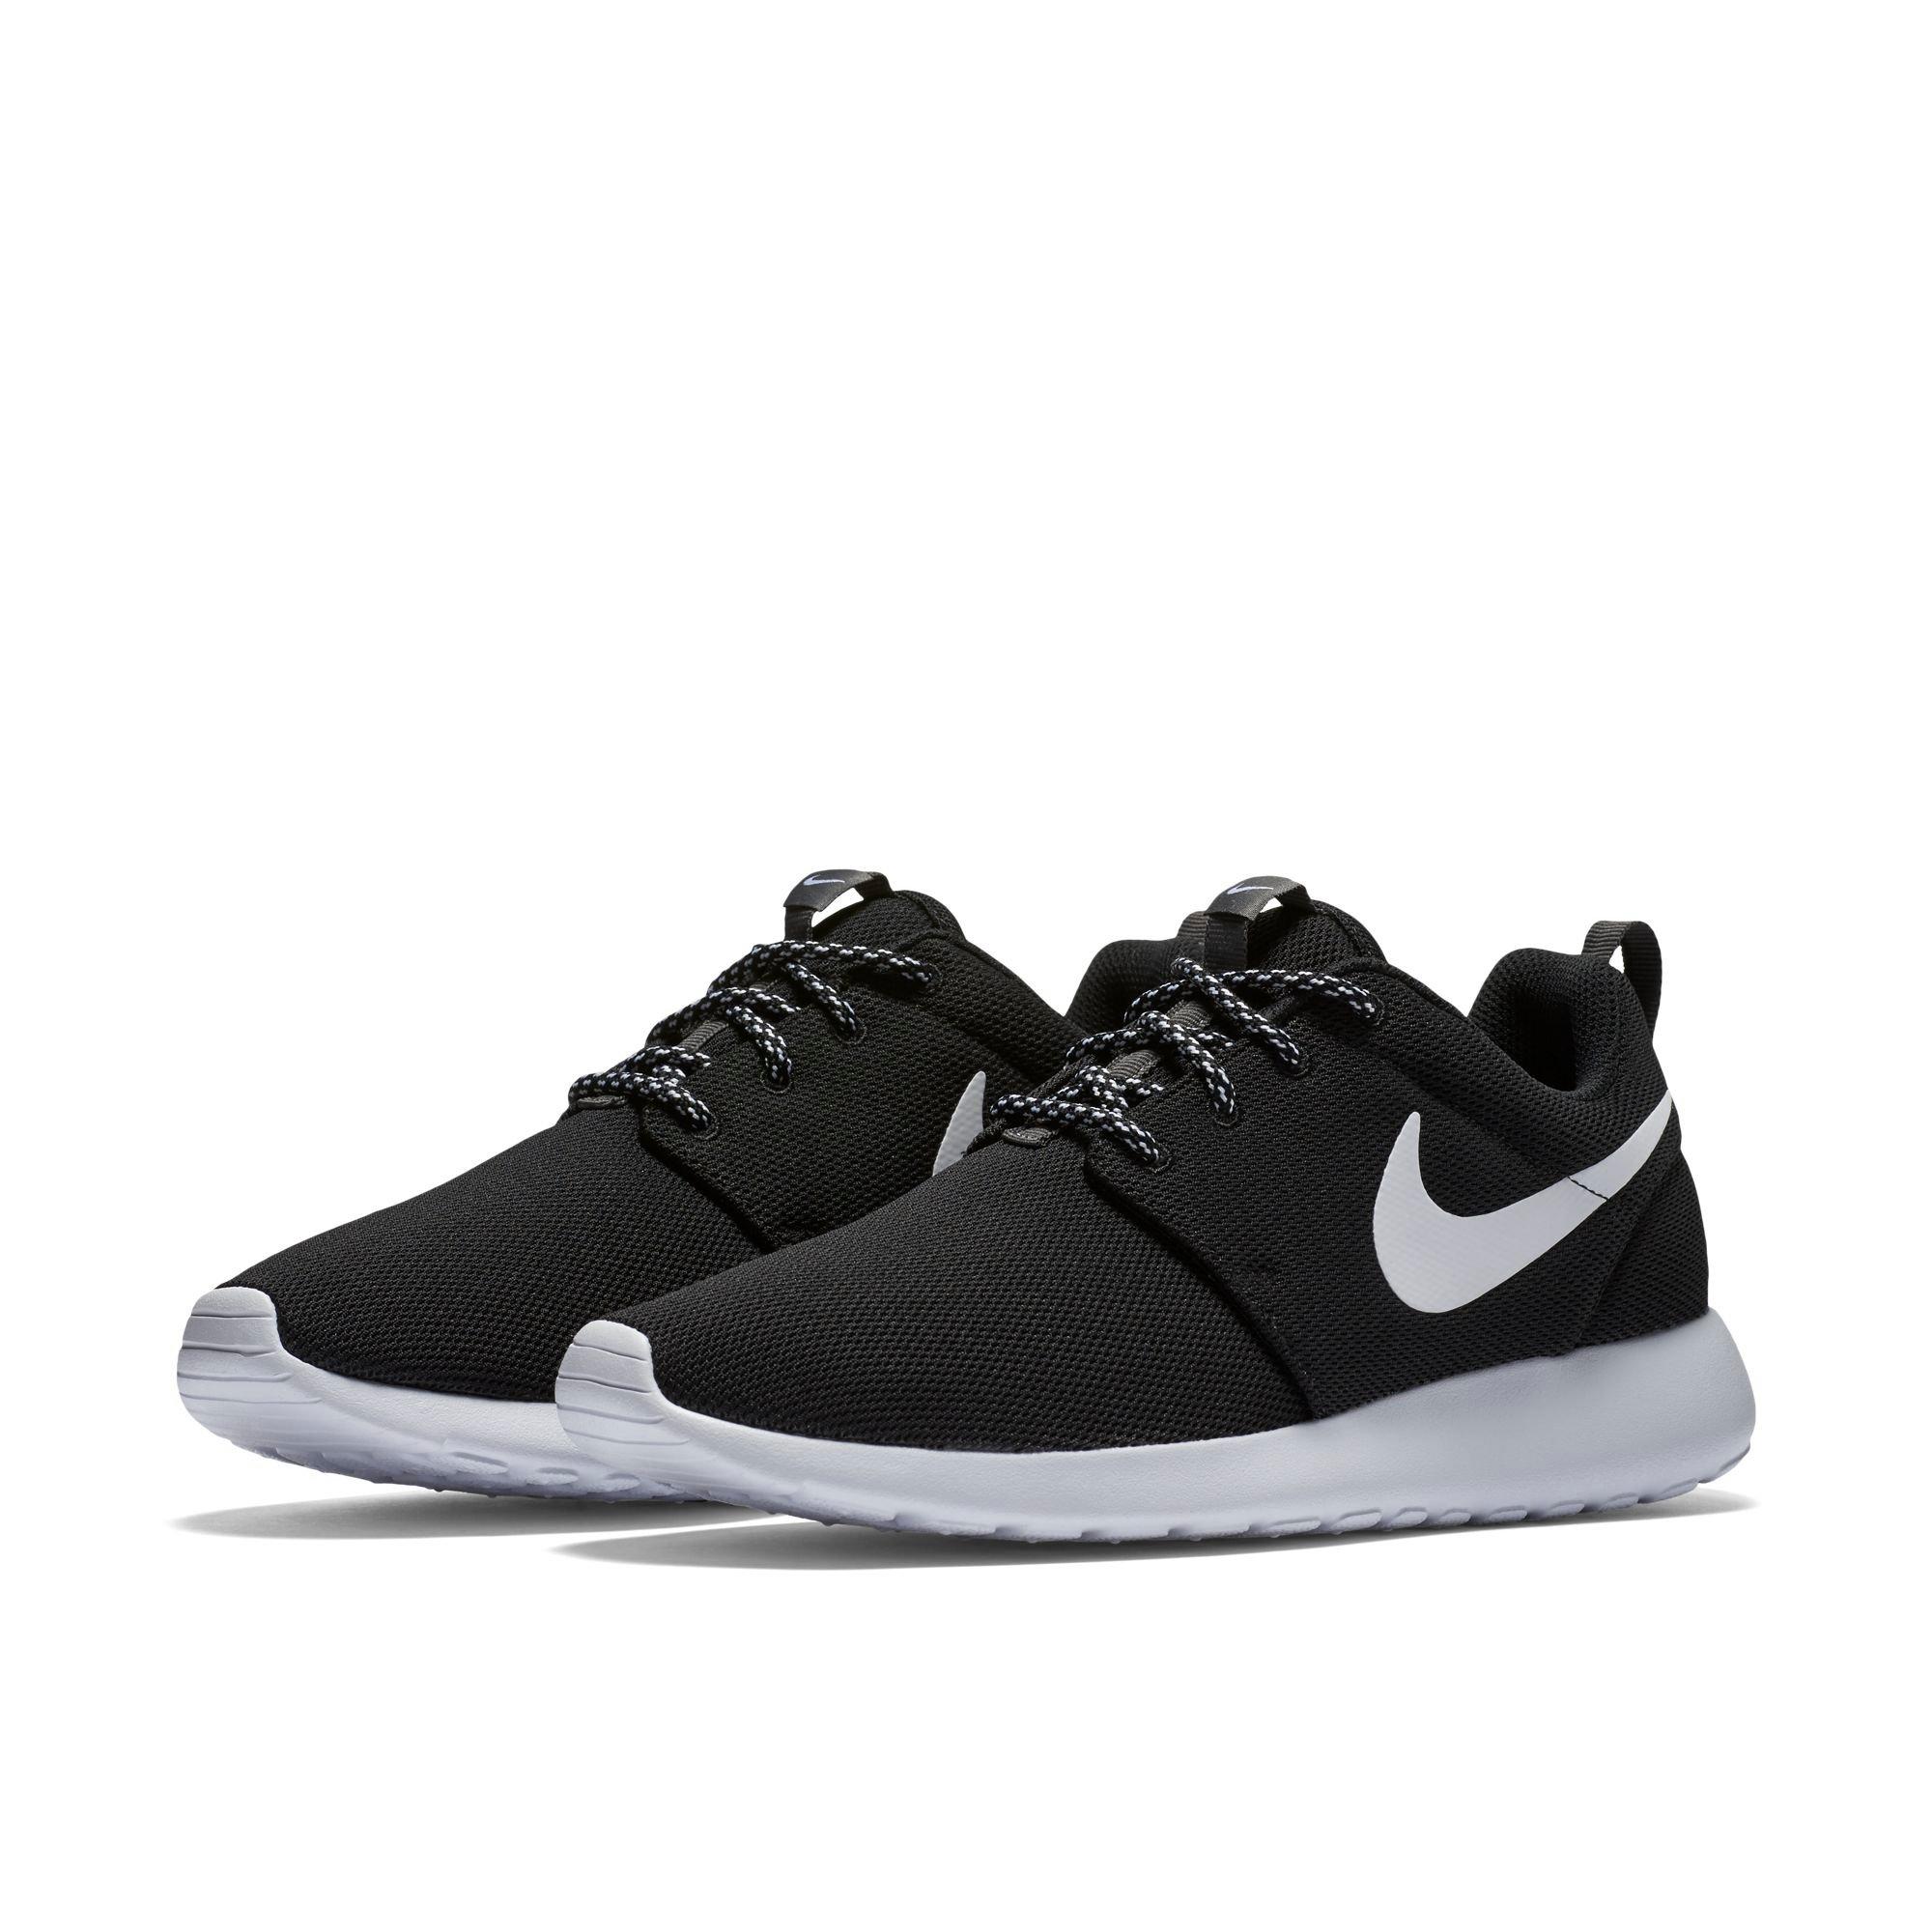 women's nike roshe one casual shoes